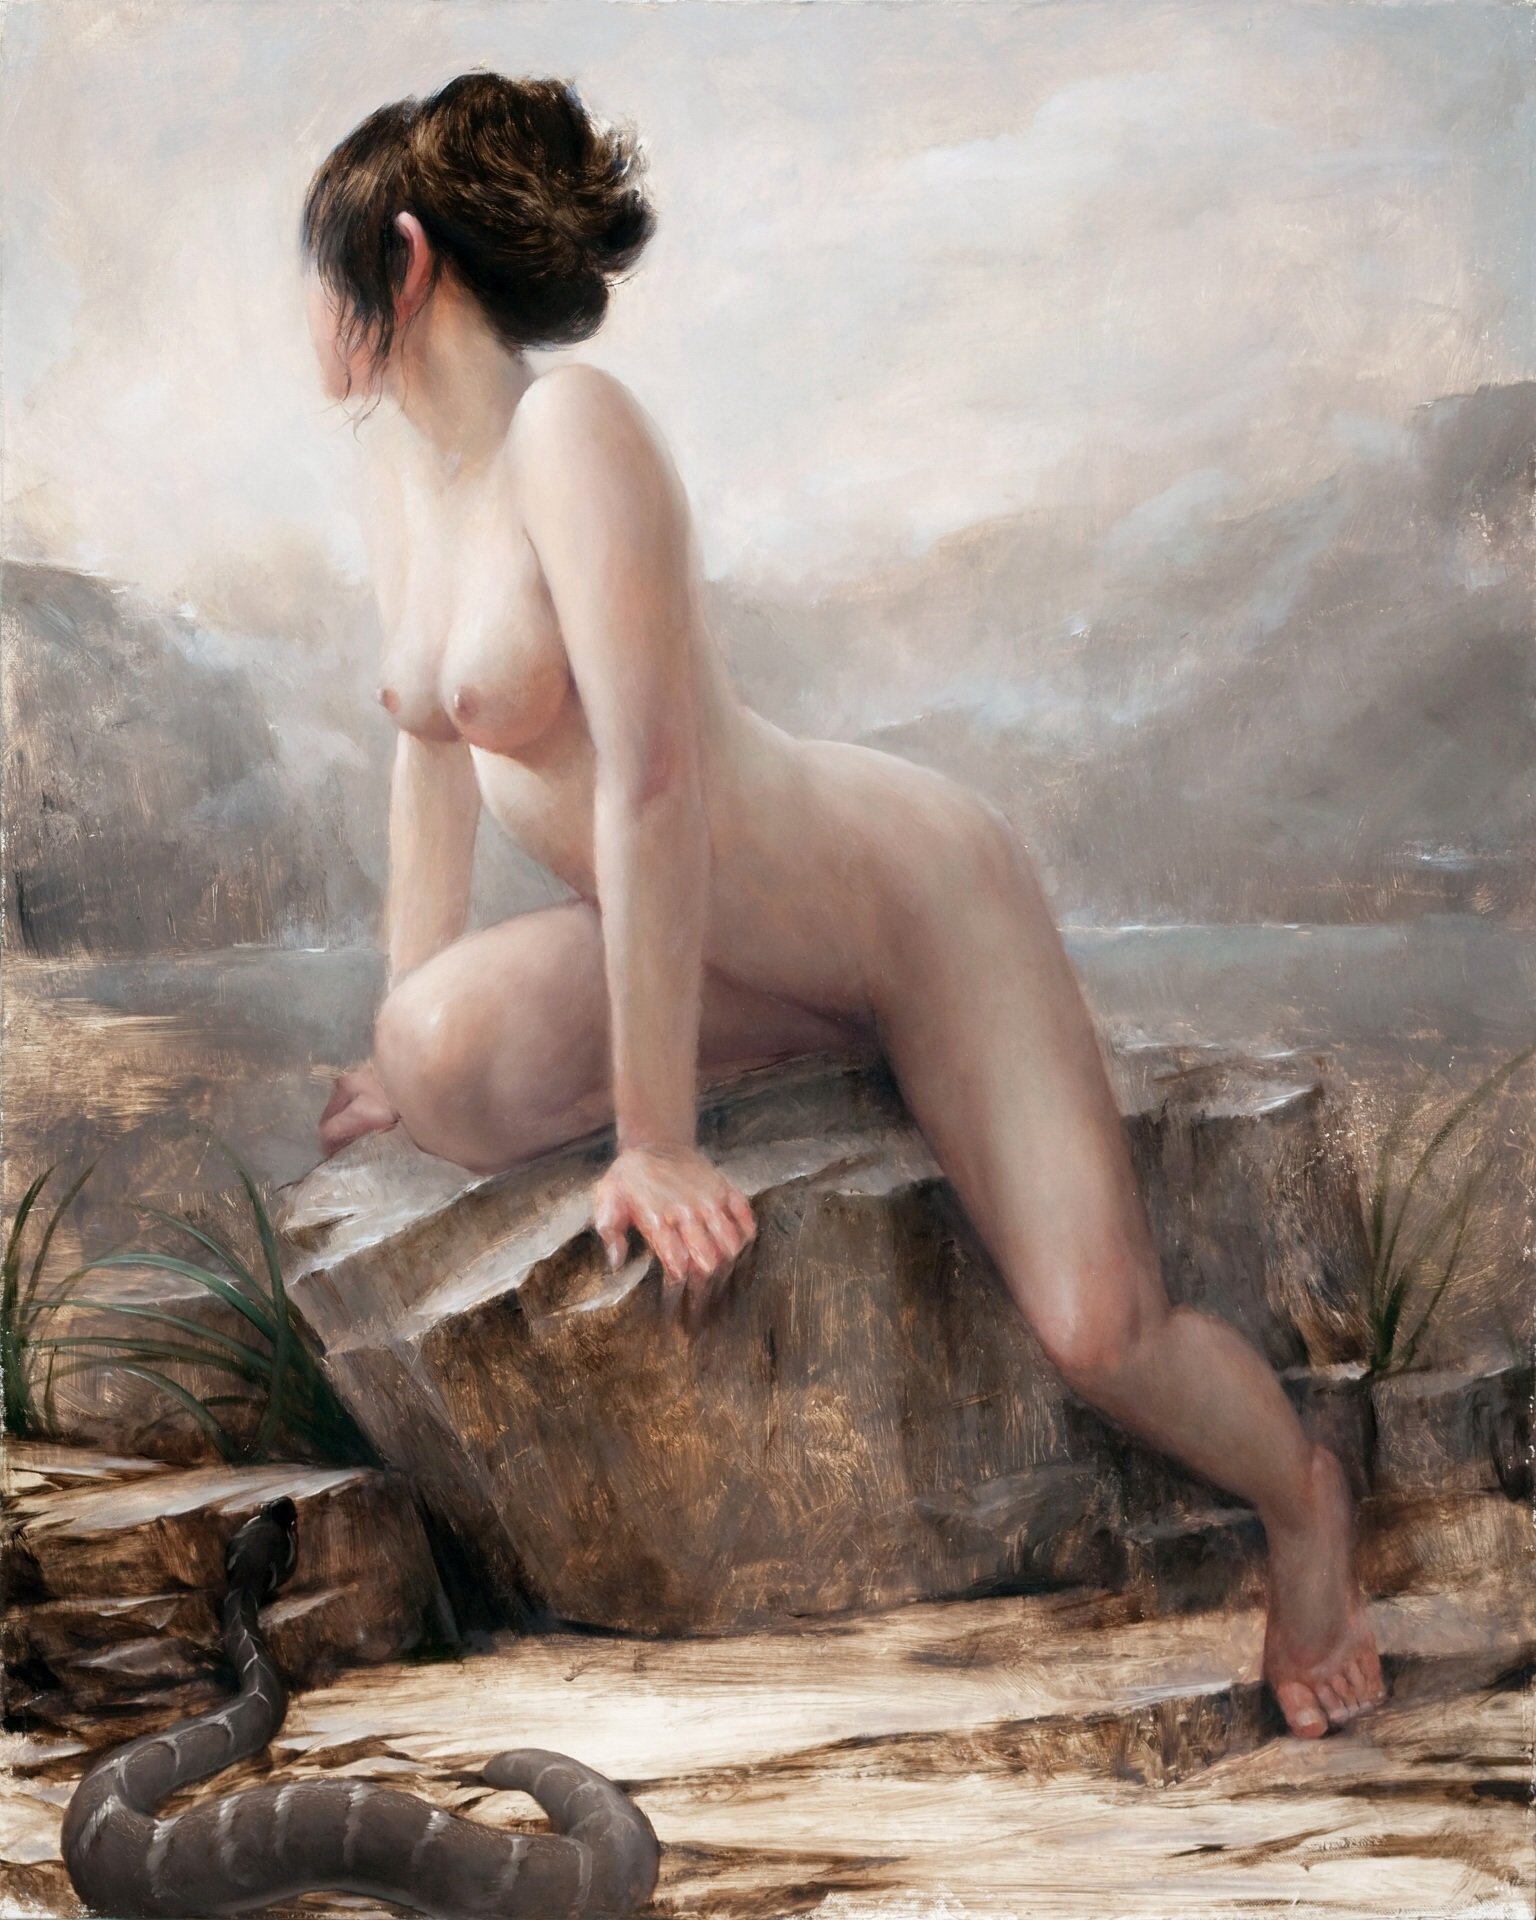 Naked Model, Morning In France, Nude Art, Real